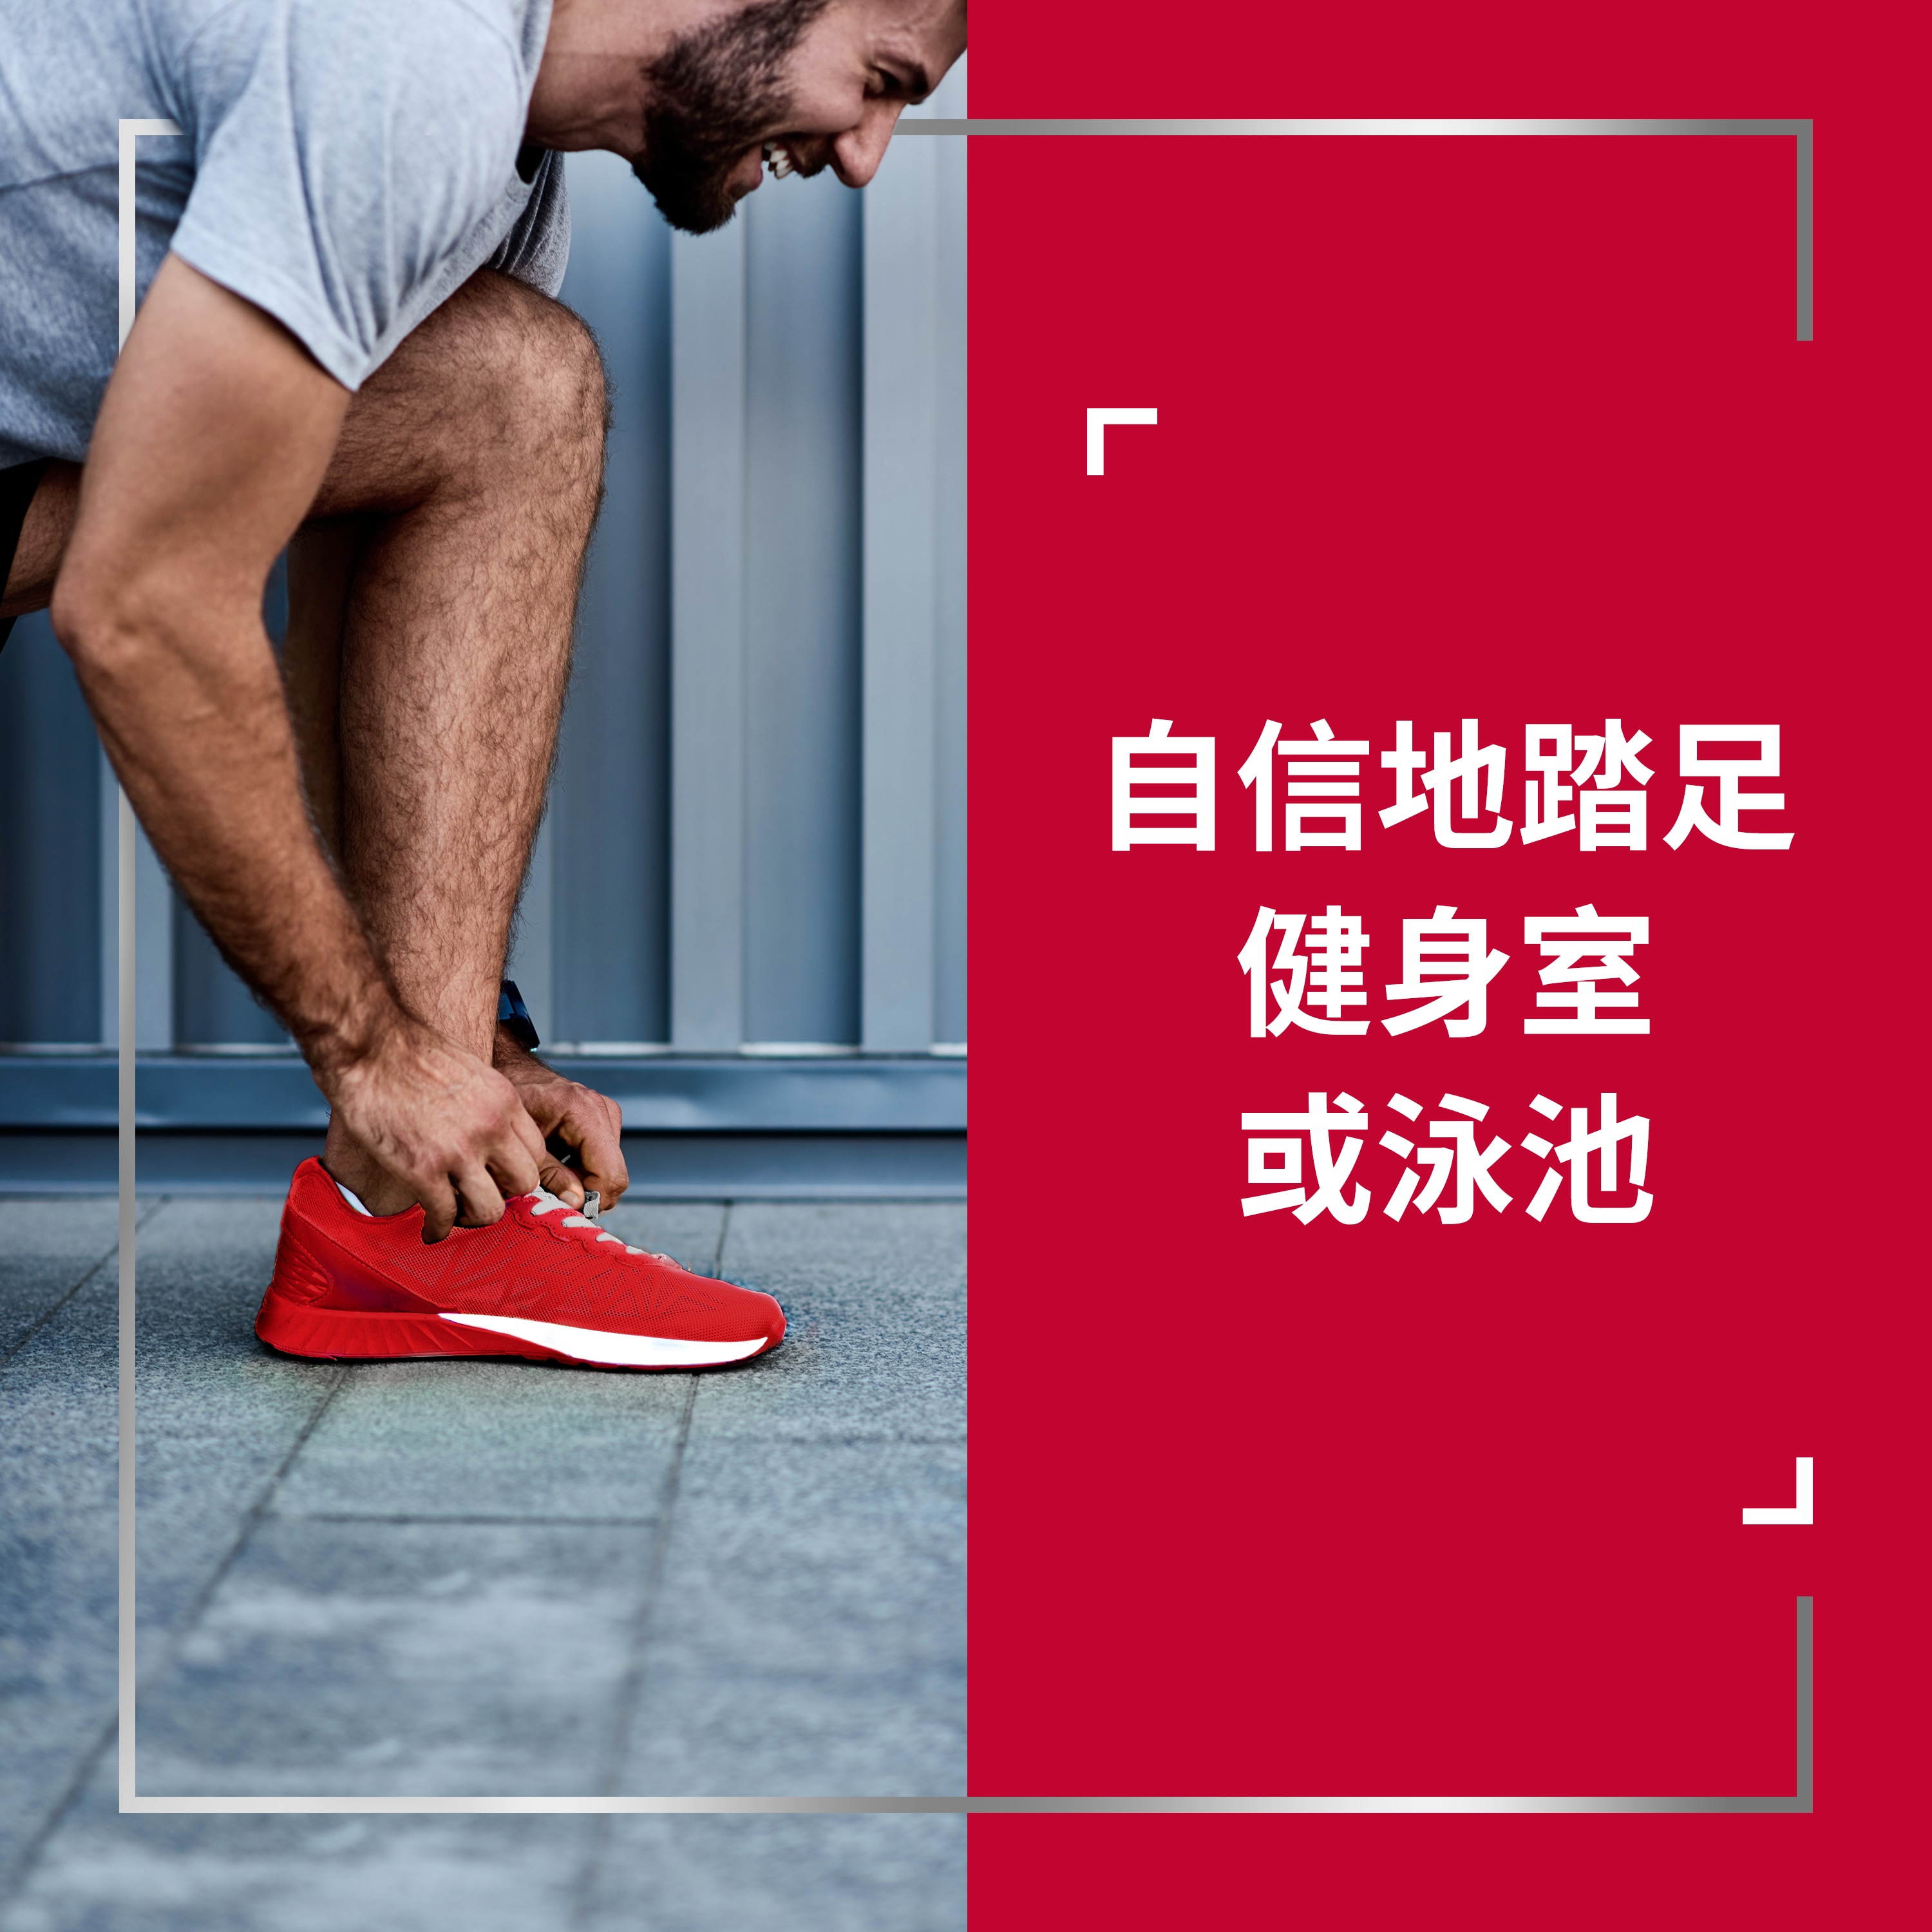 Smiling man in shorts tying red shoe, with caption on the right: Go to the gym or pool with confidence 